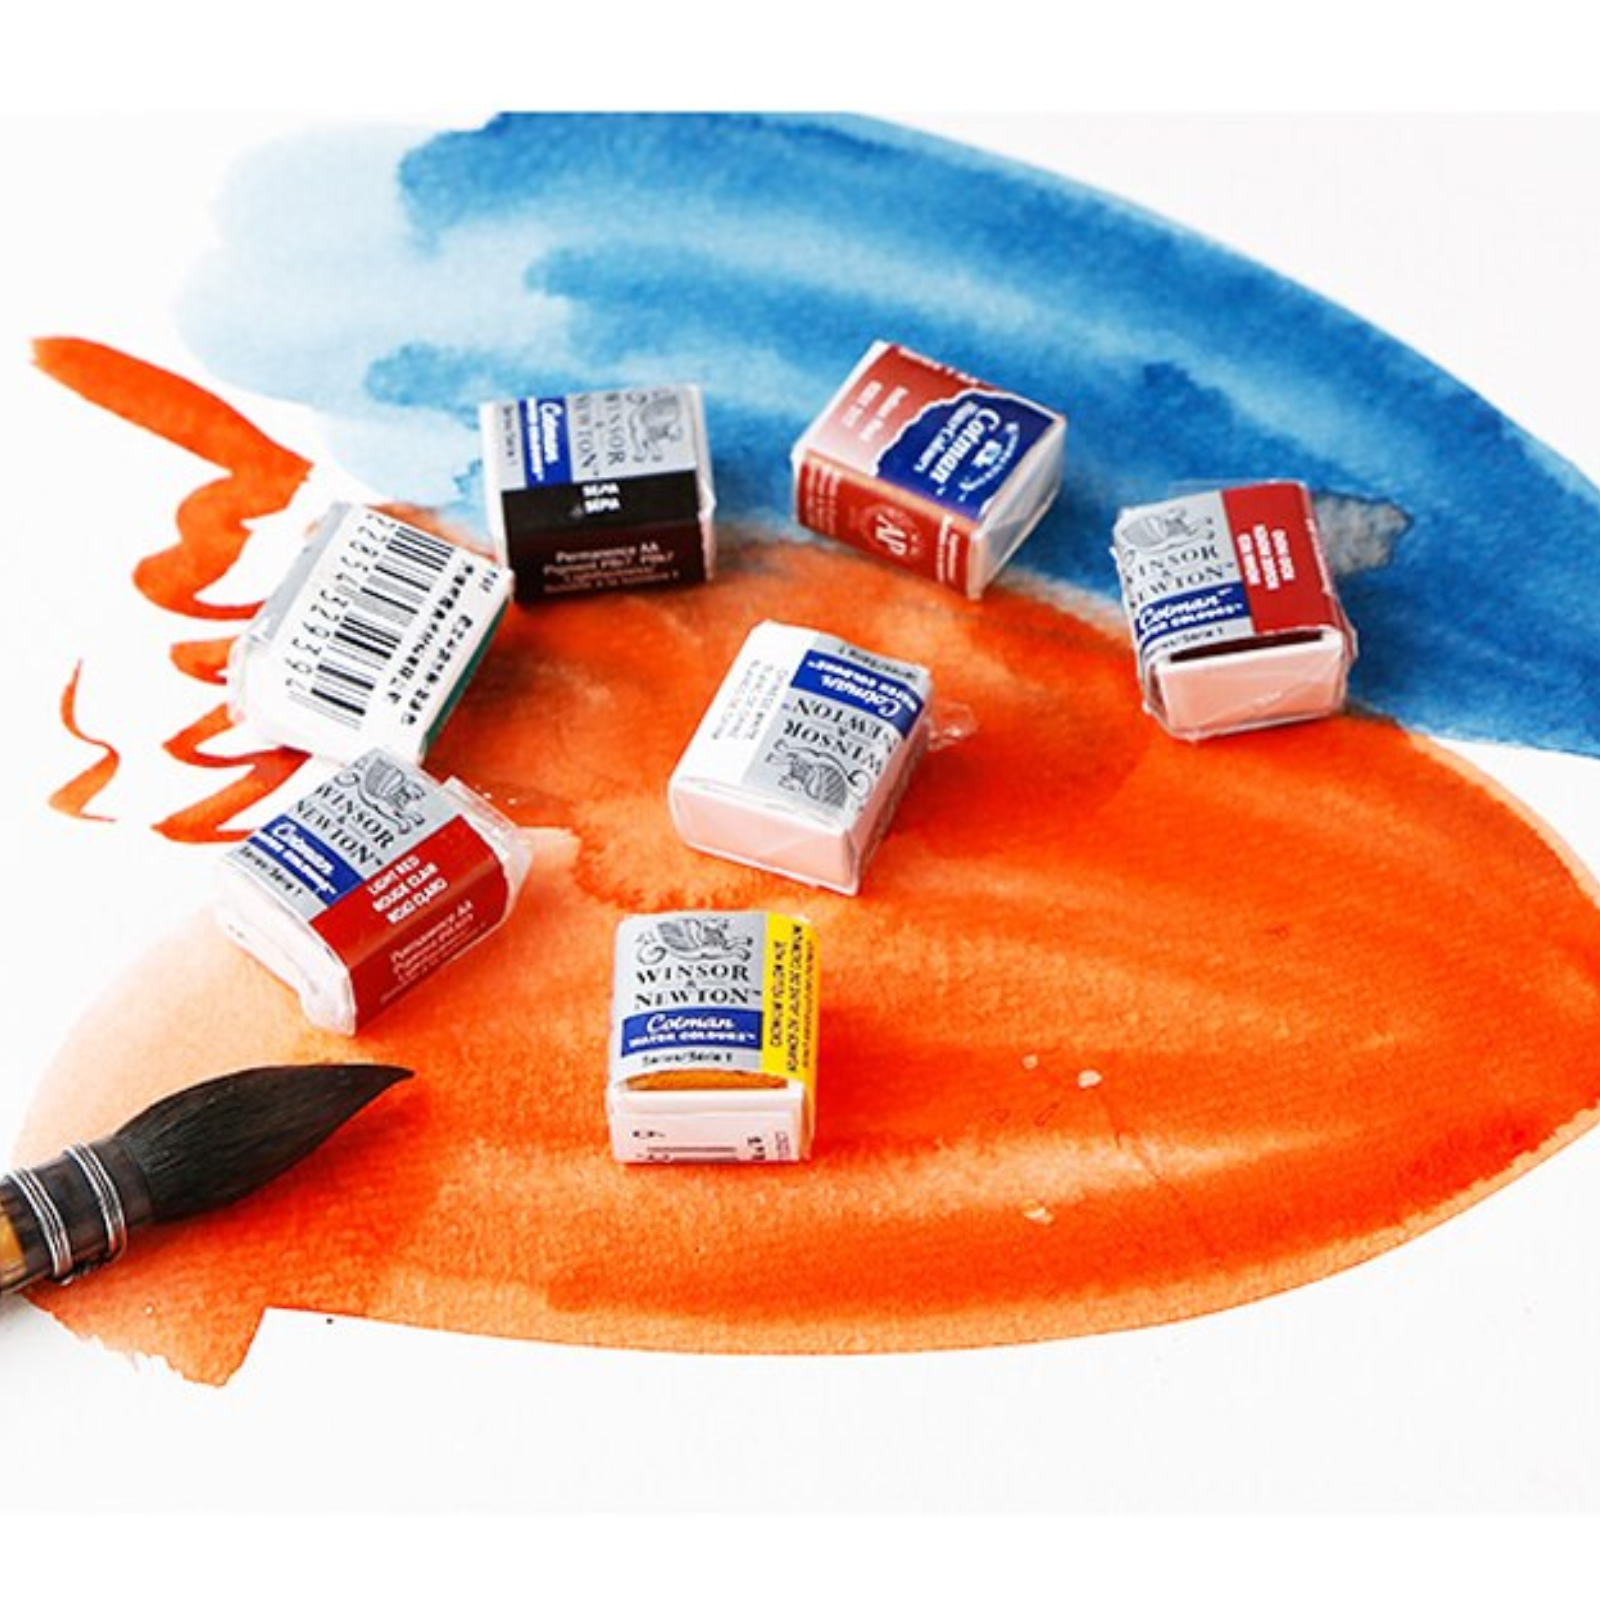 Winsor & Newton Cotman Watercolours Set Half Pans & Whole Pans - easy to manipulate with a brush or sponge